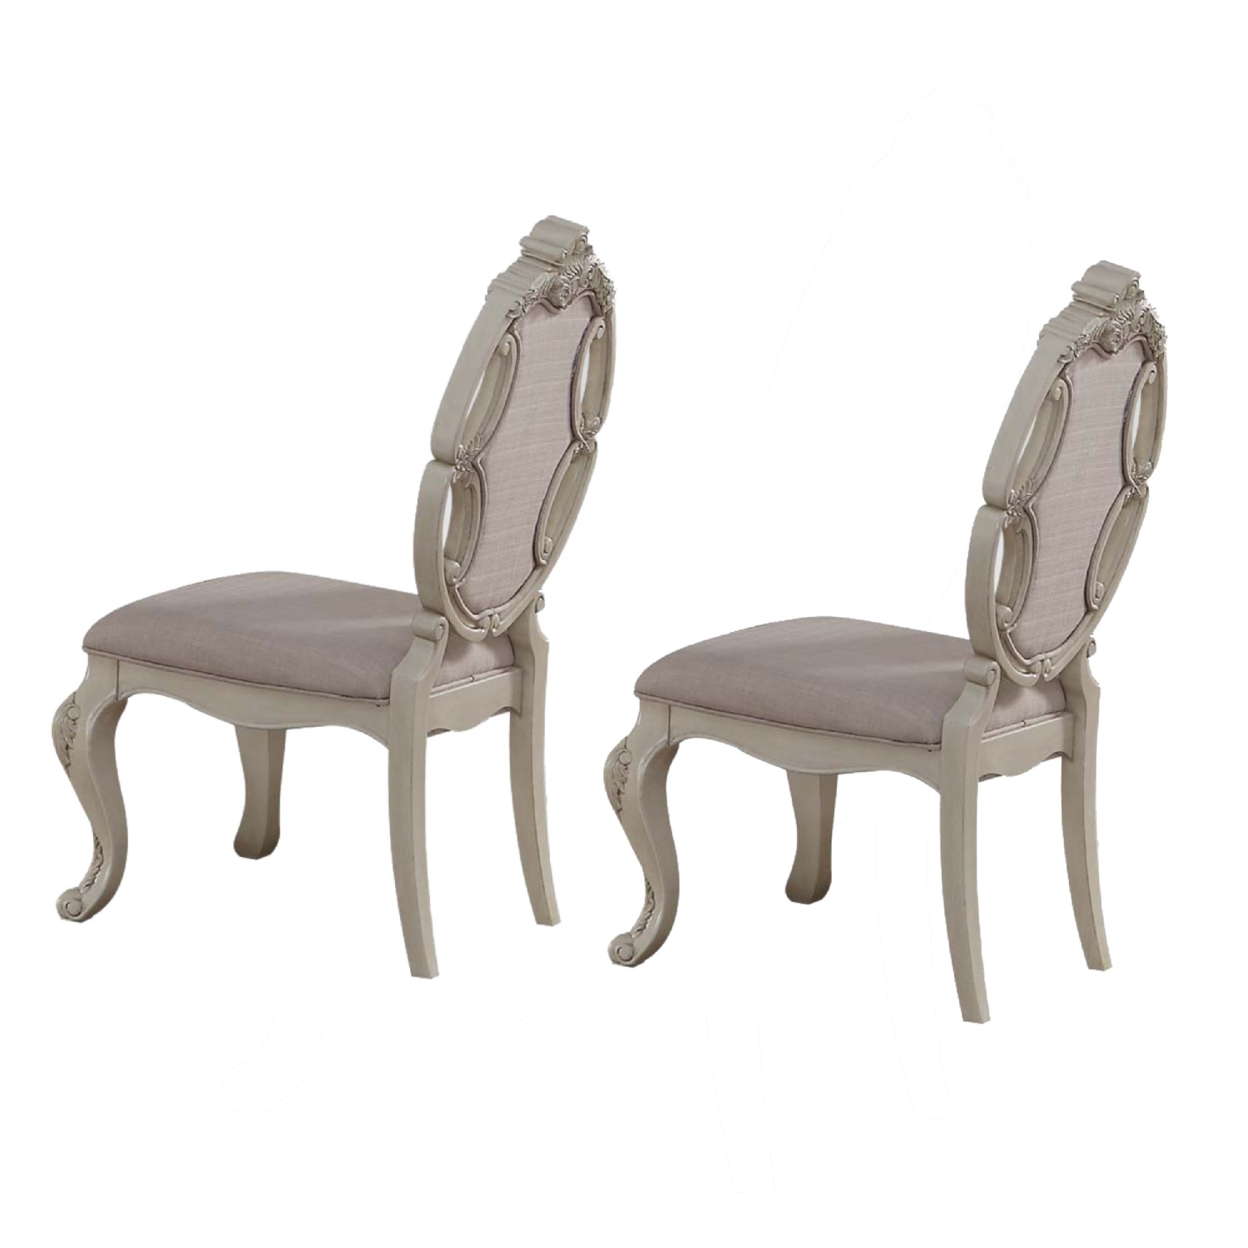 26 Inch Wide Upholstered Dining Side Chair, Set Of 2, White- Saltoro Sherpi